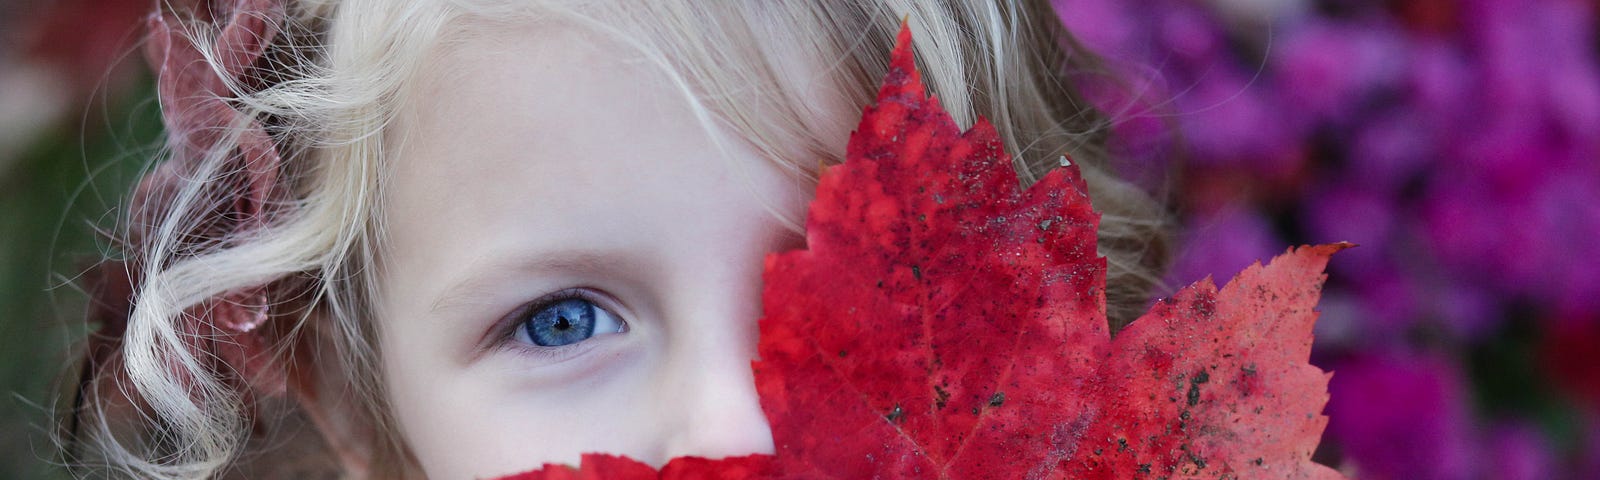 Blond-haired, blue-eyed little girl holding a large red autumn leaf.